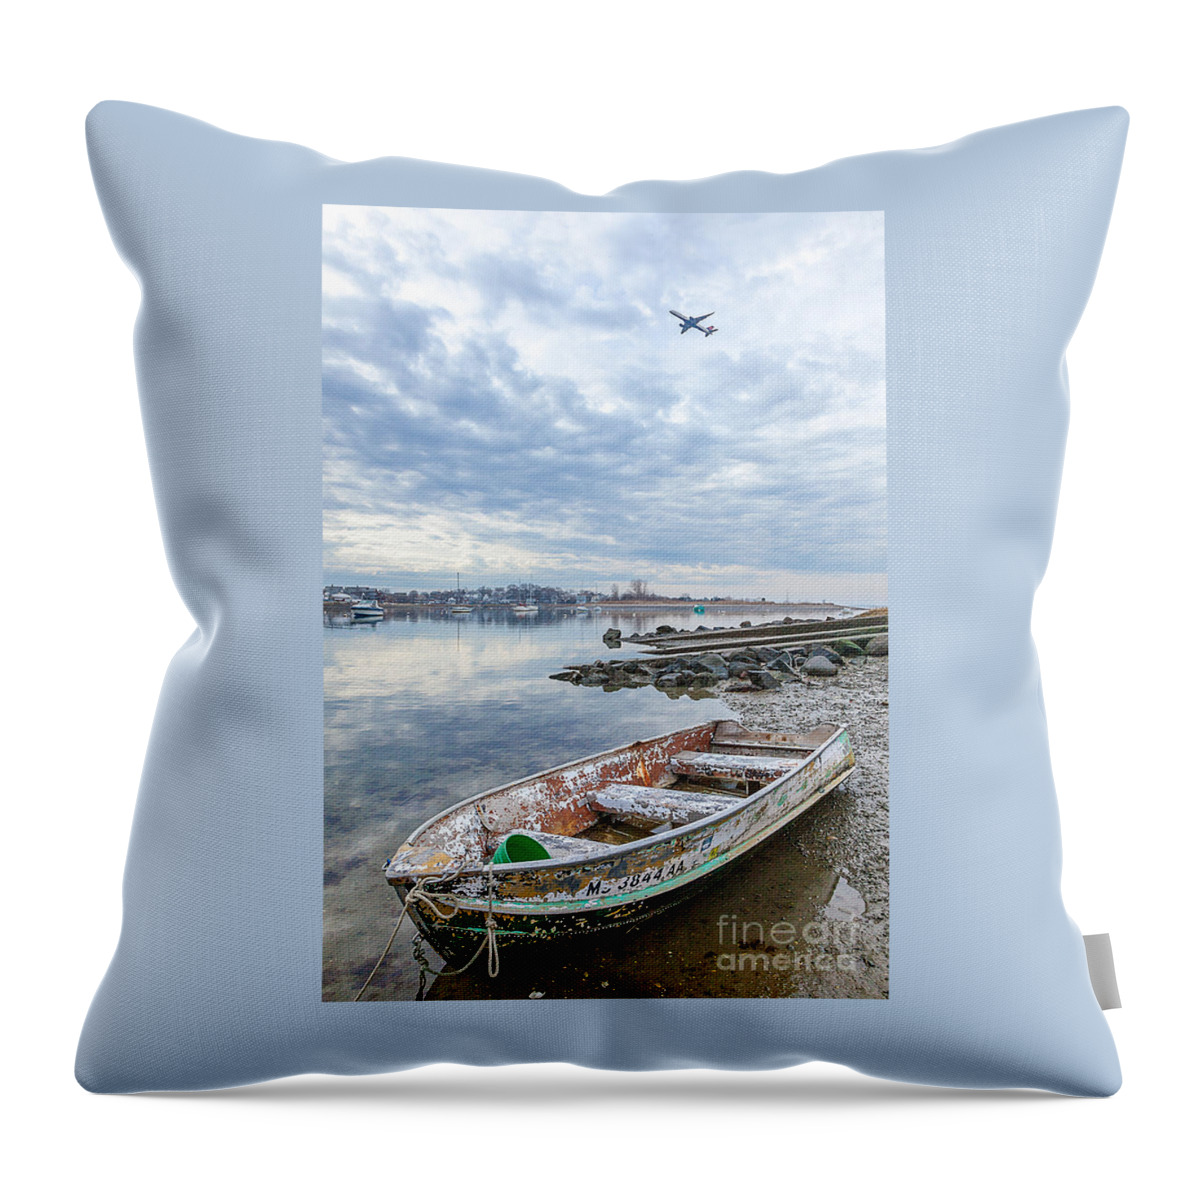 America Throw Pillow featuring the photograph Winthrop Harbor 3 by Susan Cole Kelly